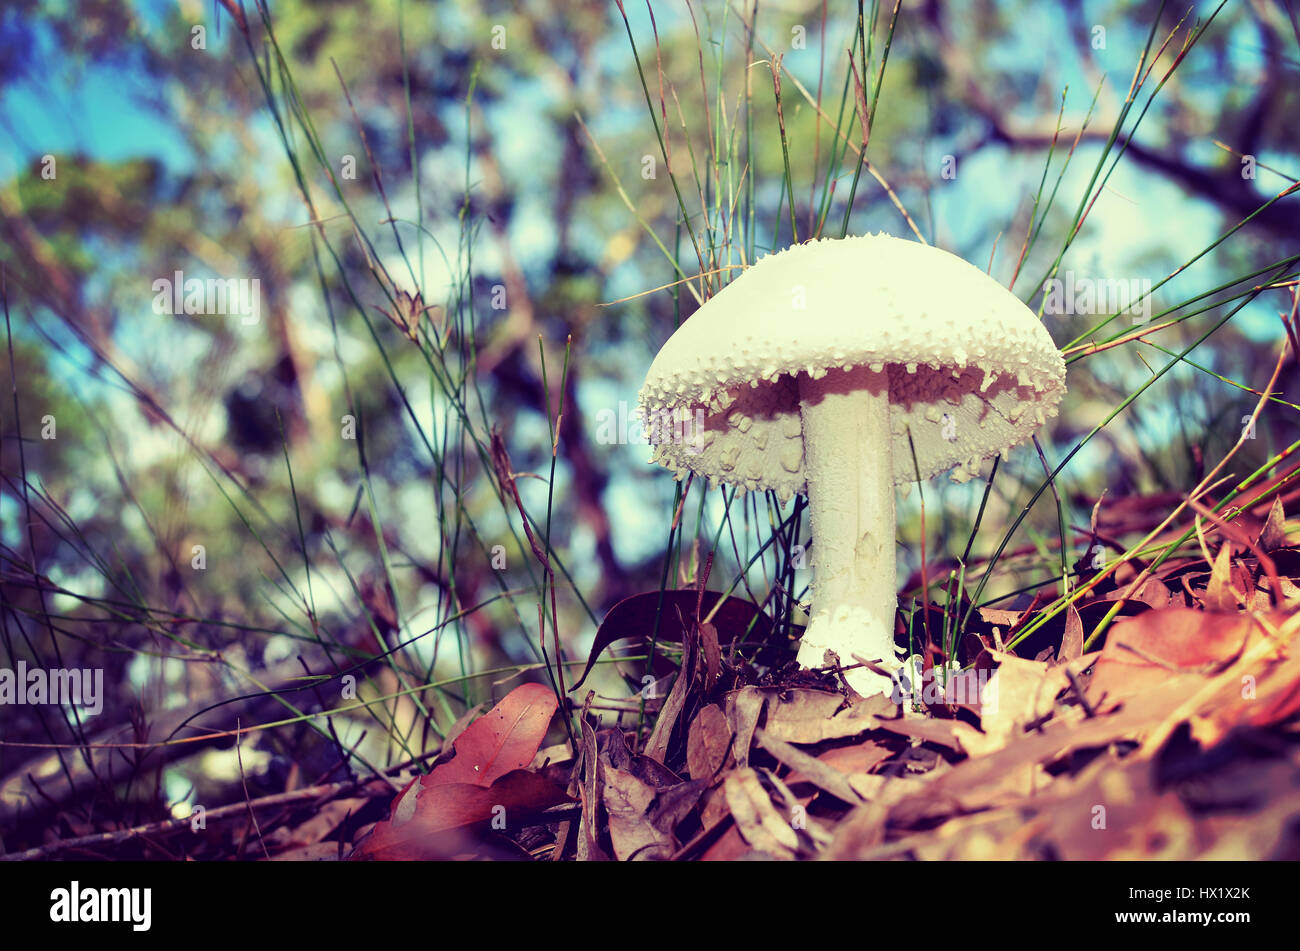 White puffy Amanita mushroom (fungi) with warts or spikes growing on the Australian forest floor Stock Photo